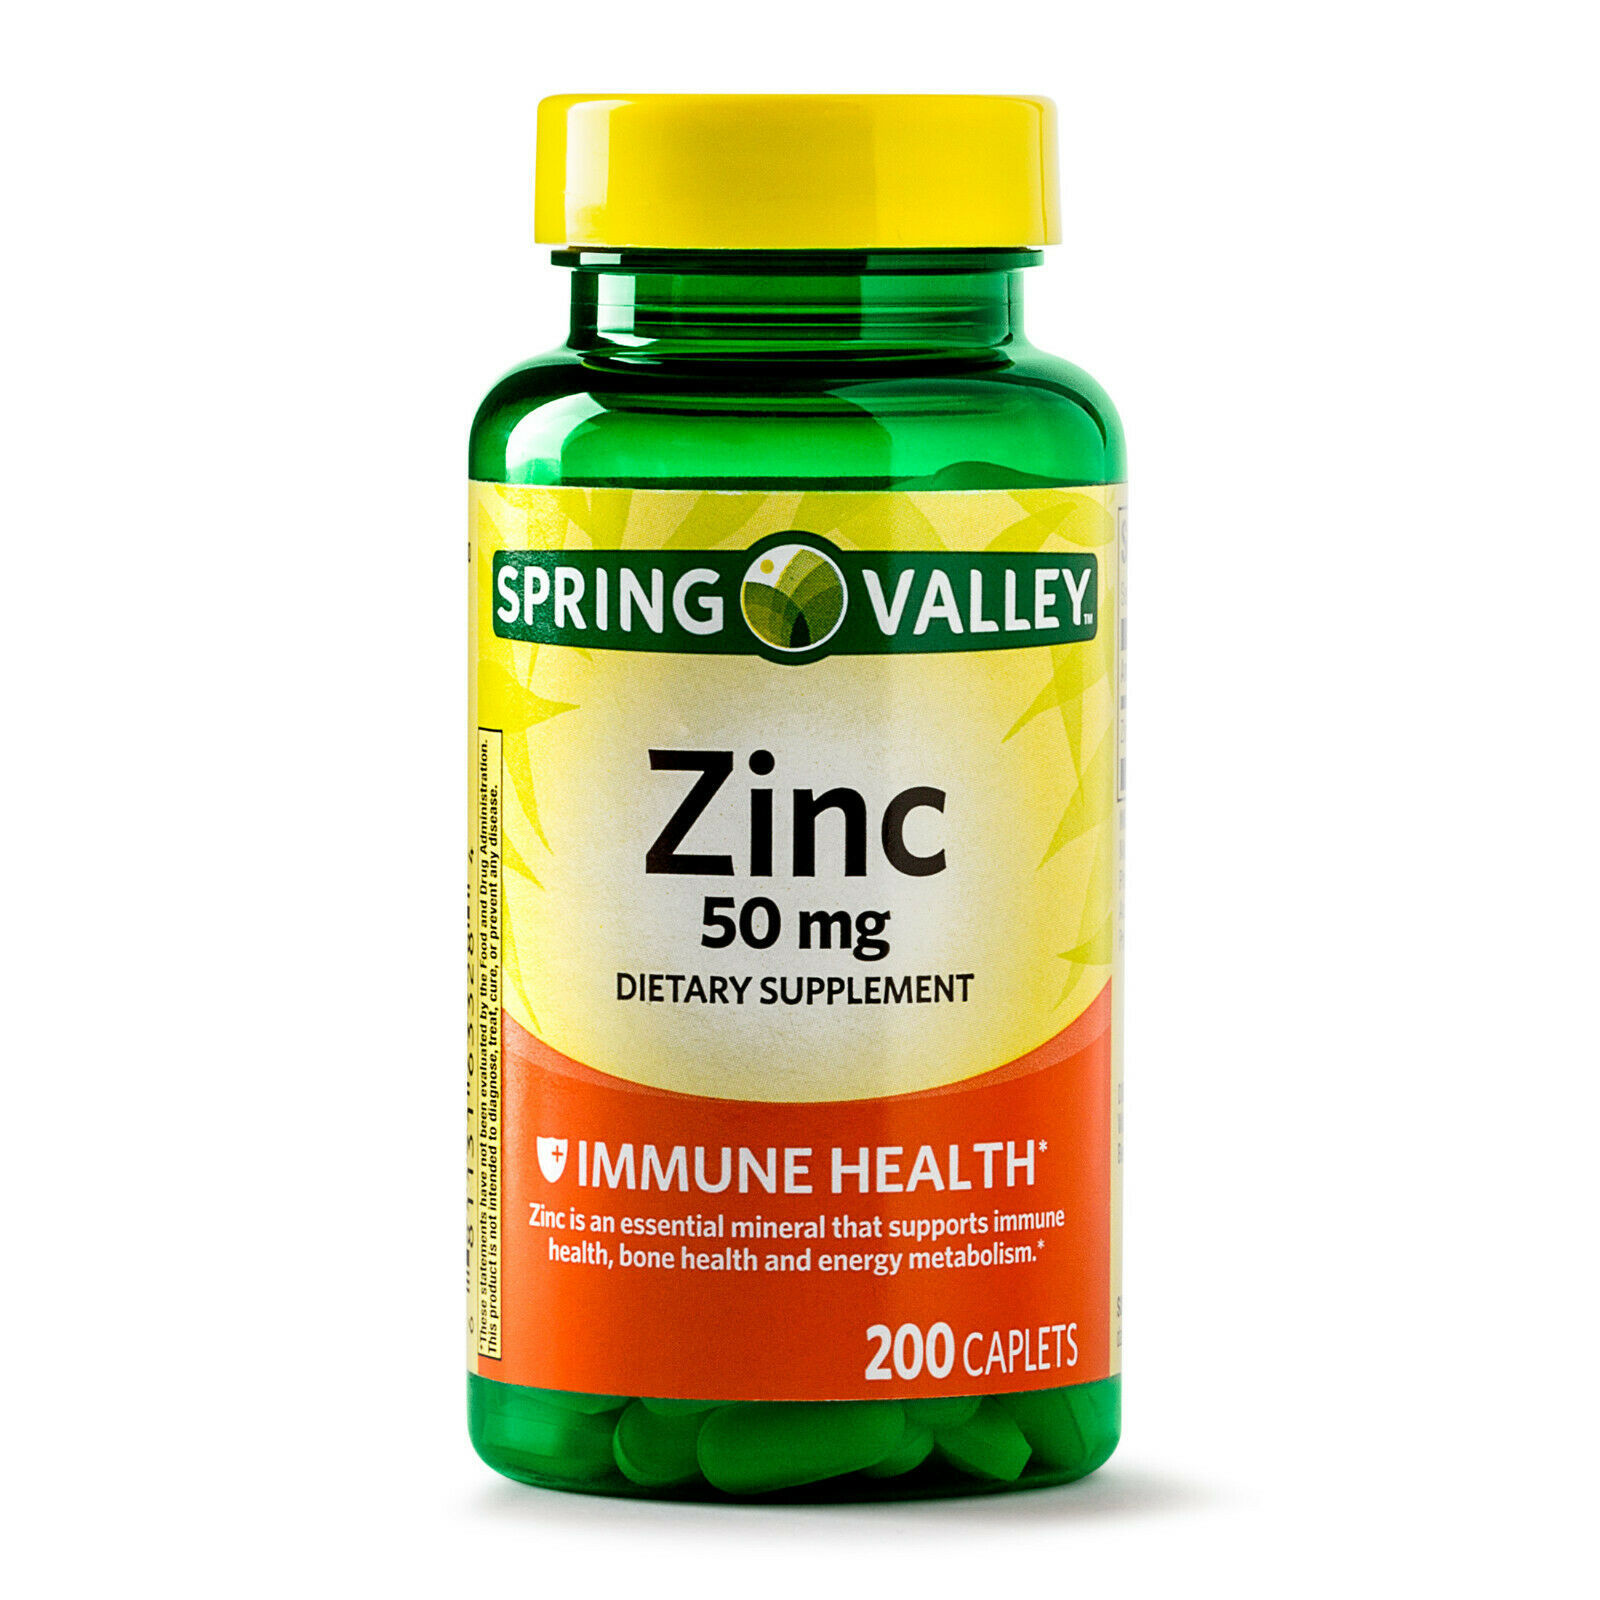 Brand New Spring Valley Zinc Vitamin 50 mg 200 Count Caplets For Immune Support